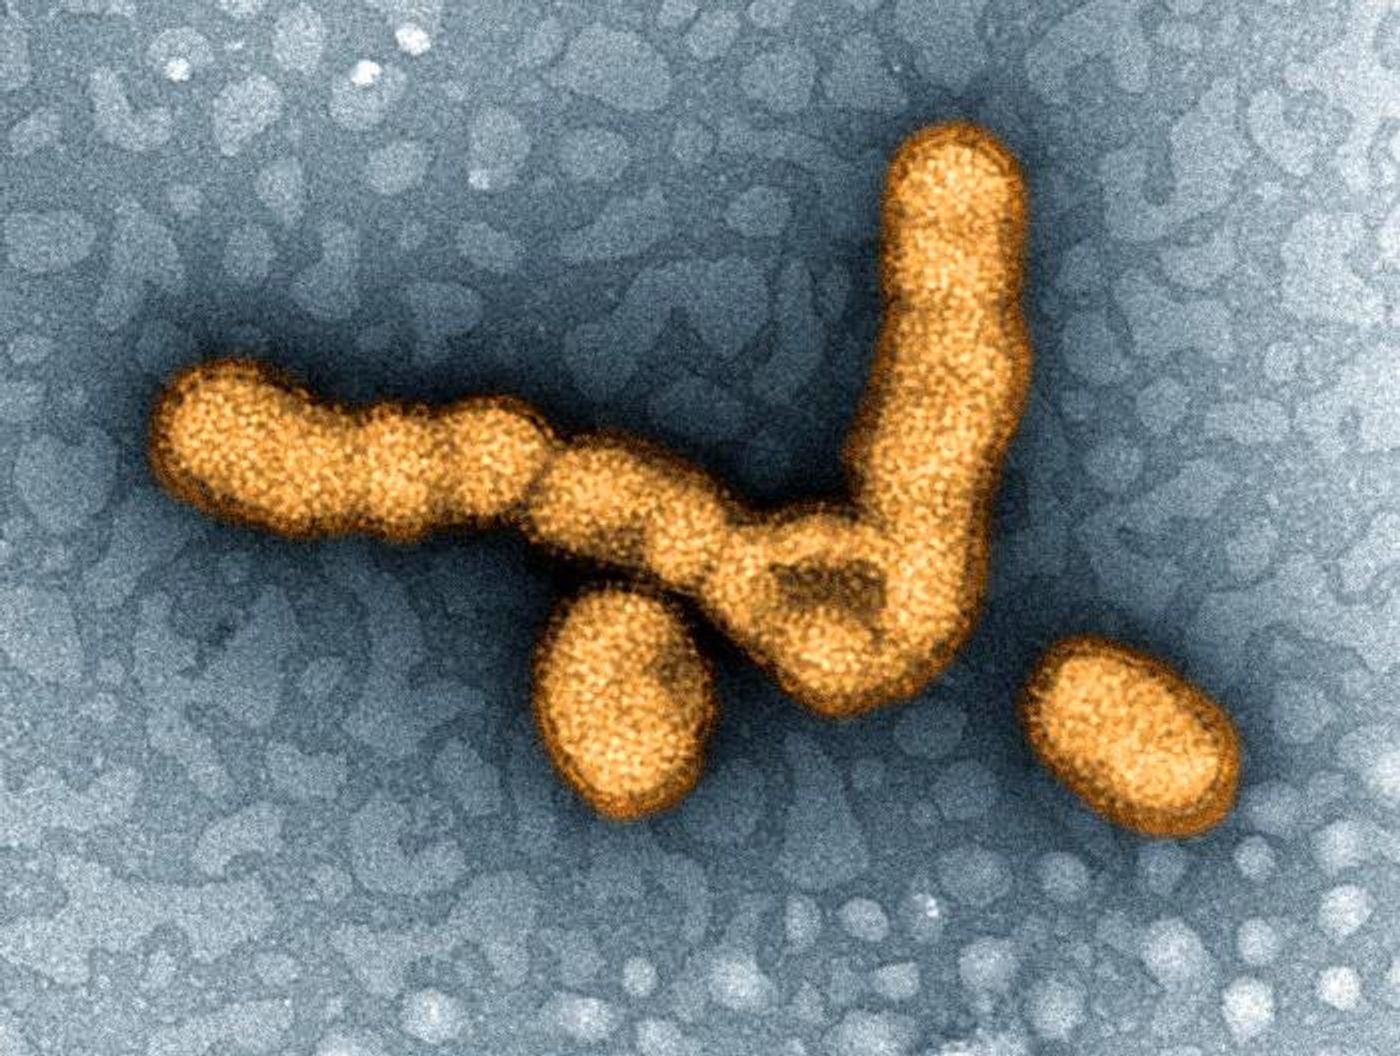 A digitally colorized TEM image depicting a small grouping of H1N1 influenza virus particles. / Credit: National Institute of Allergy and Infectious Diseases (NIAID)